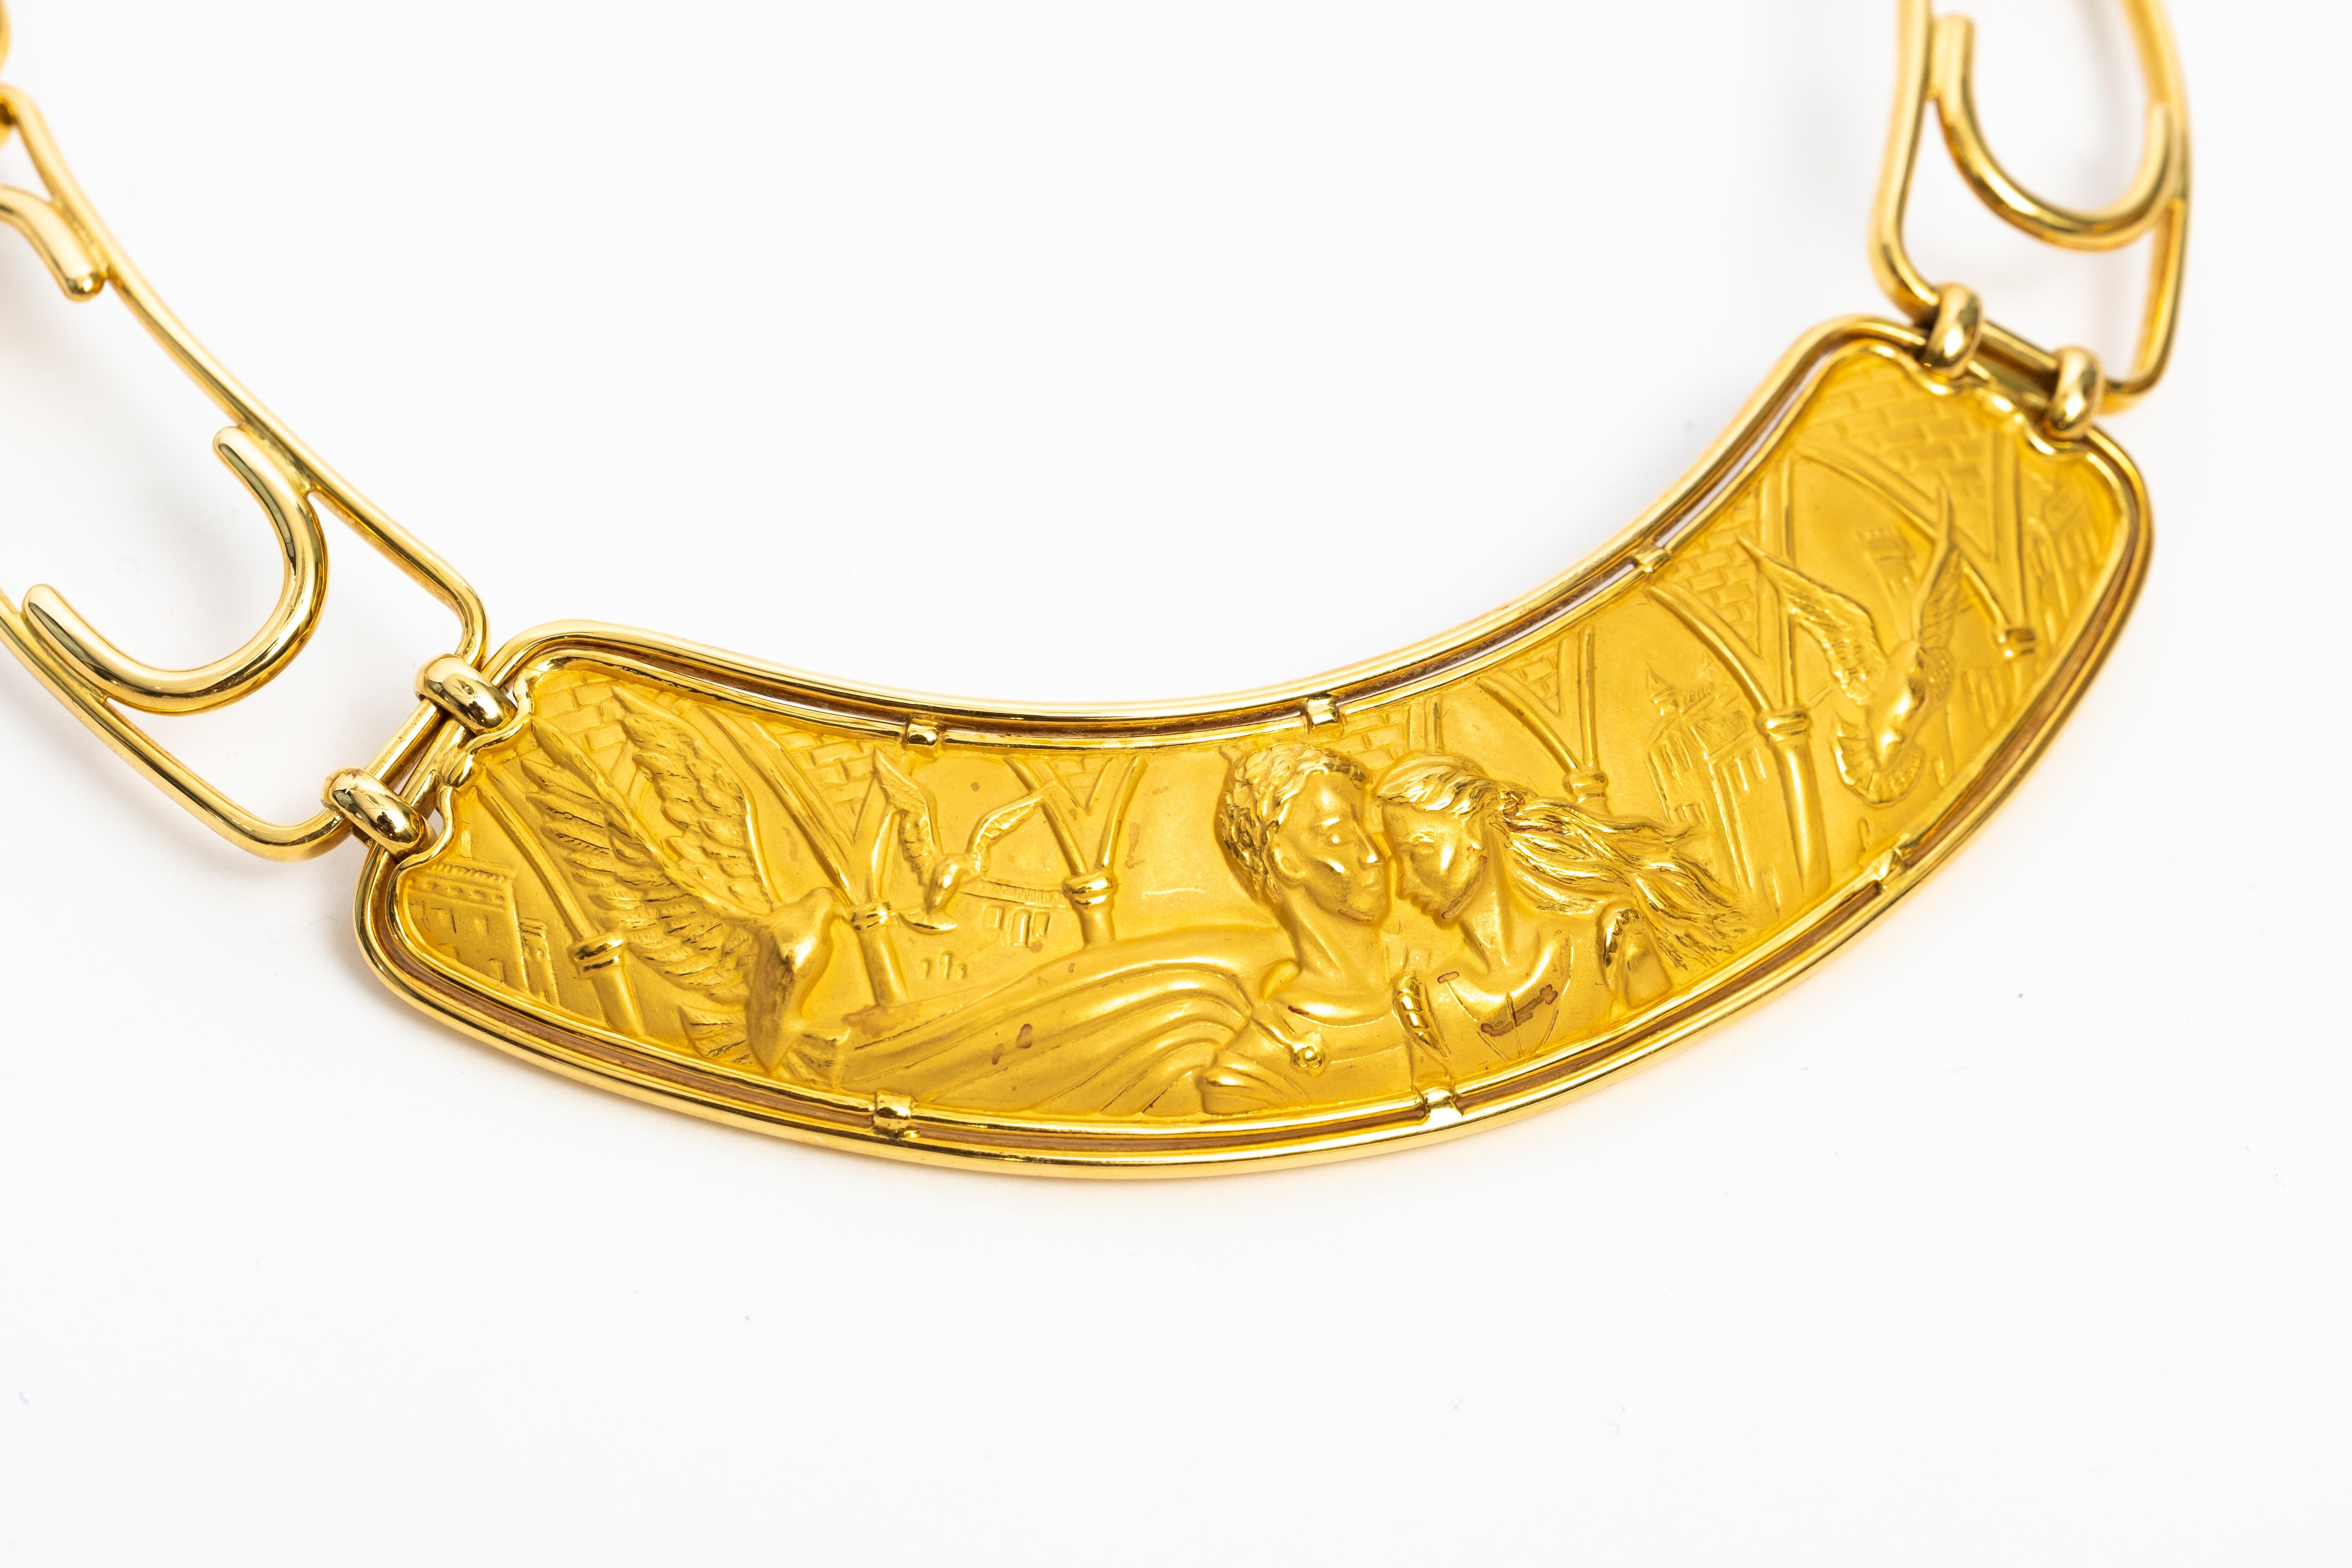 Carrera y Carrera Signed Romeo and Juliet 18k Gold Bib Style Necklace. Dimensions: Inner Circle 15.5